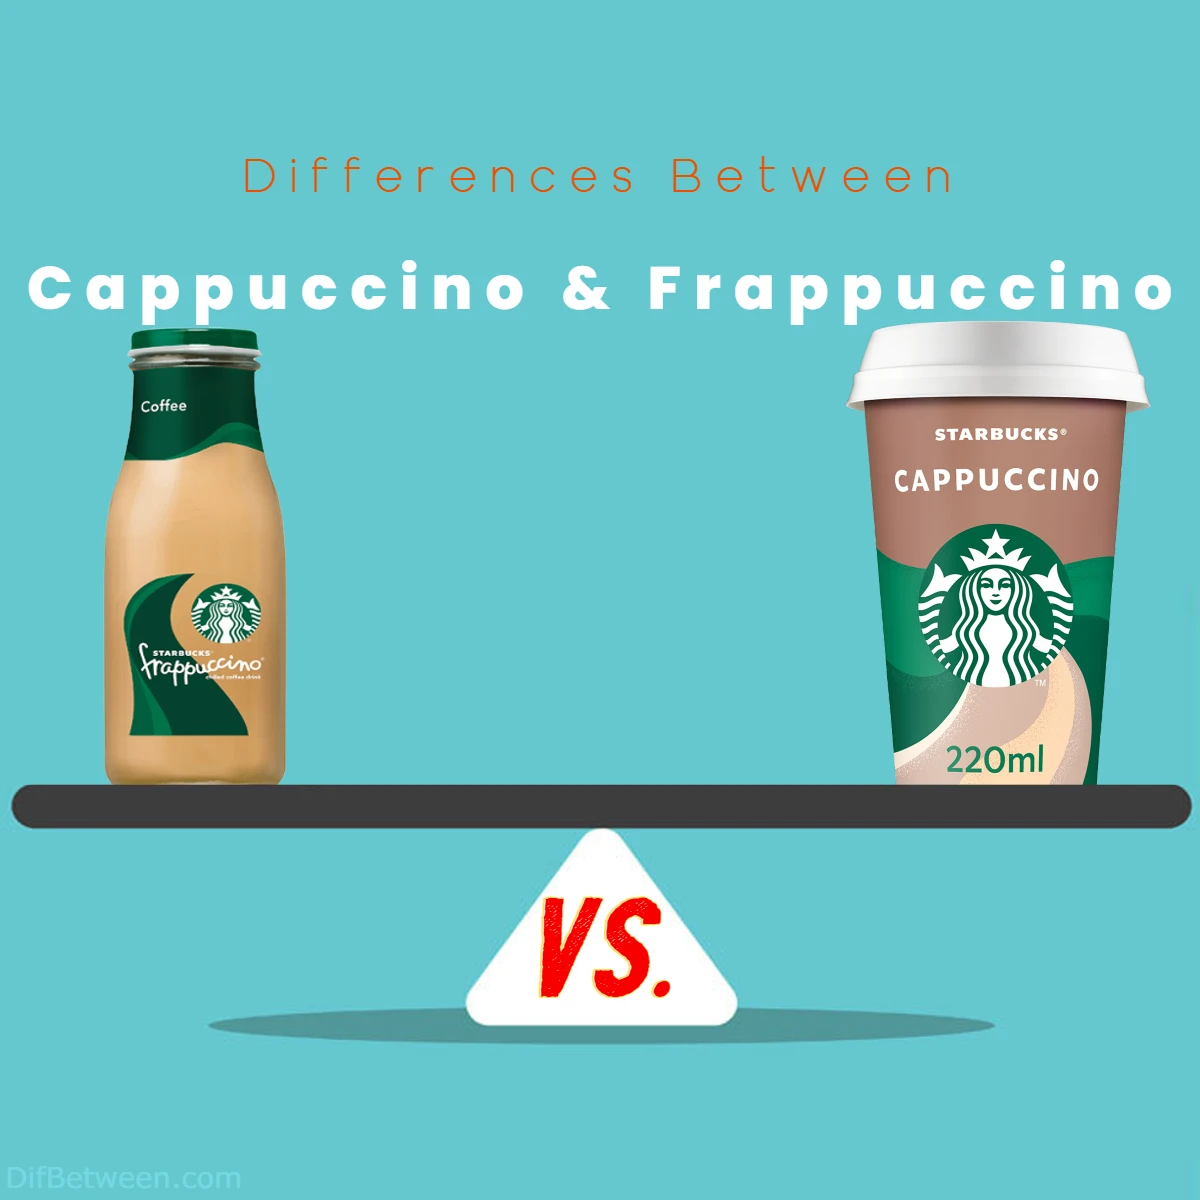 Differences Between Frappuccino and Cappuccino